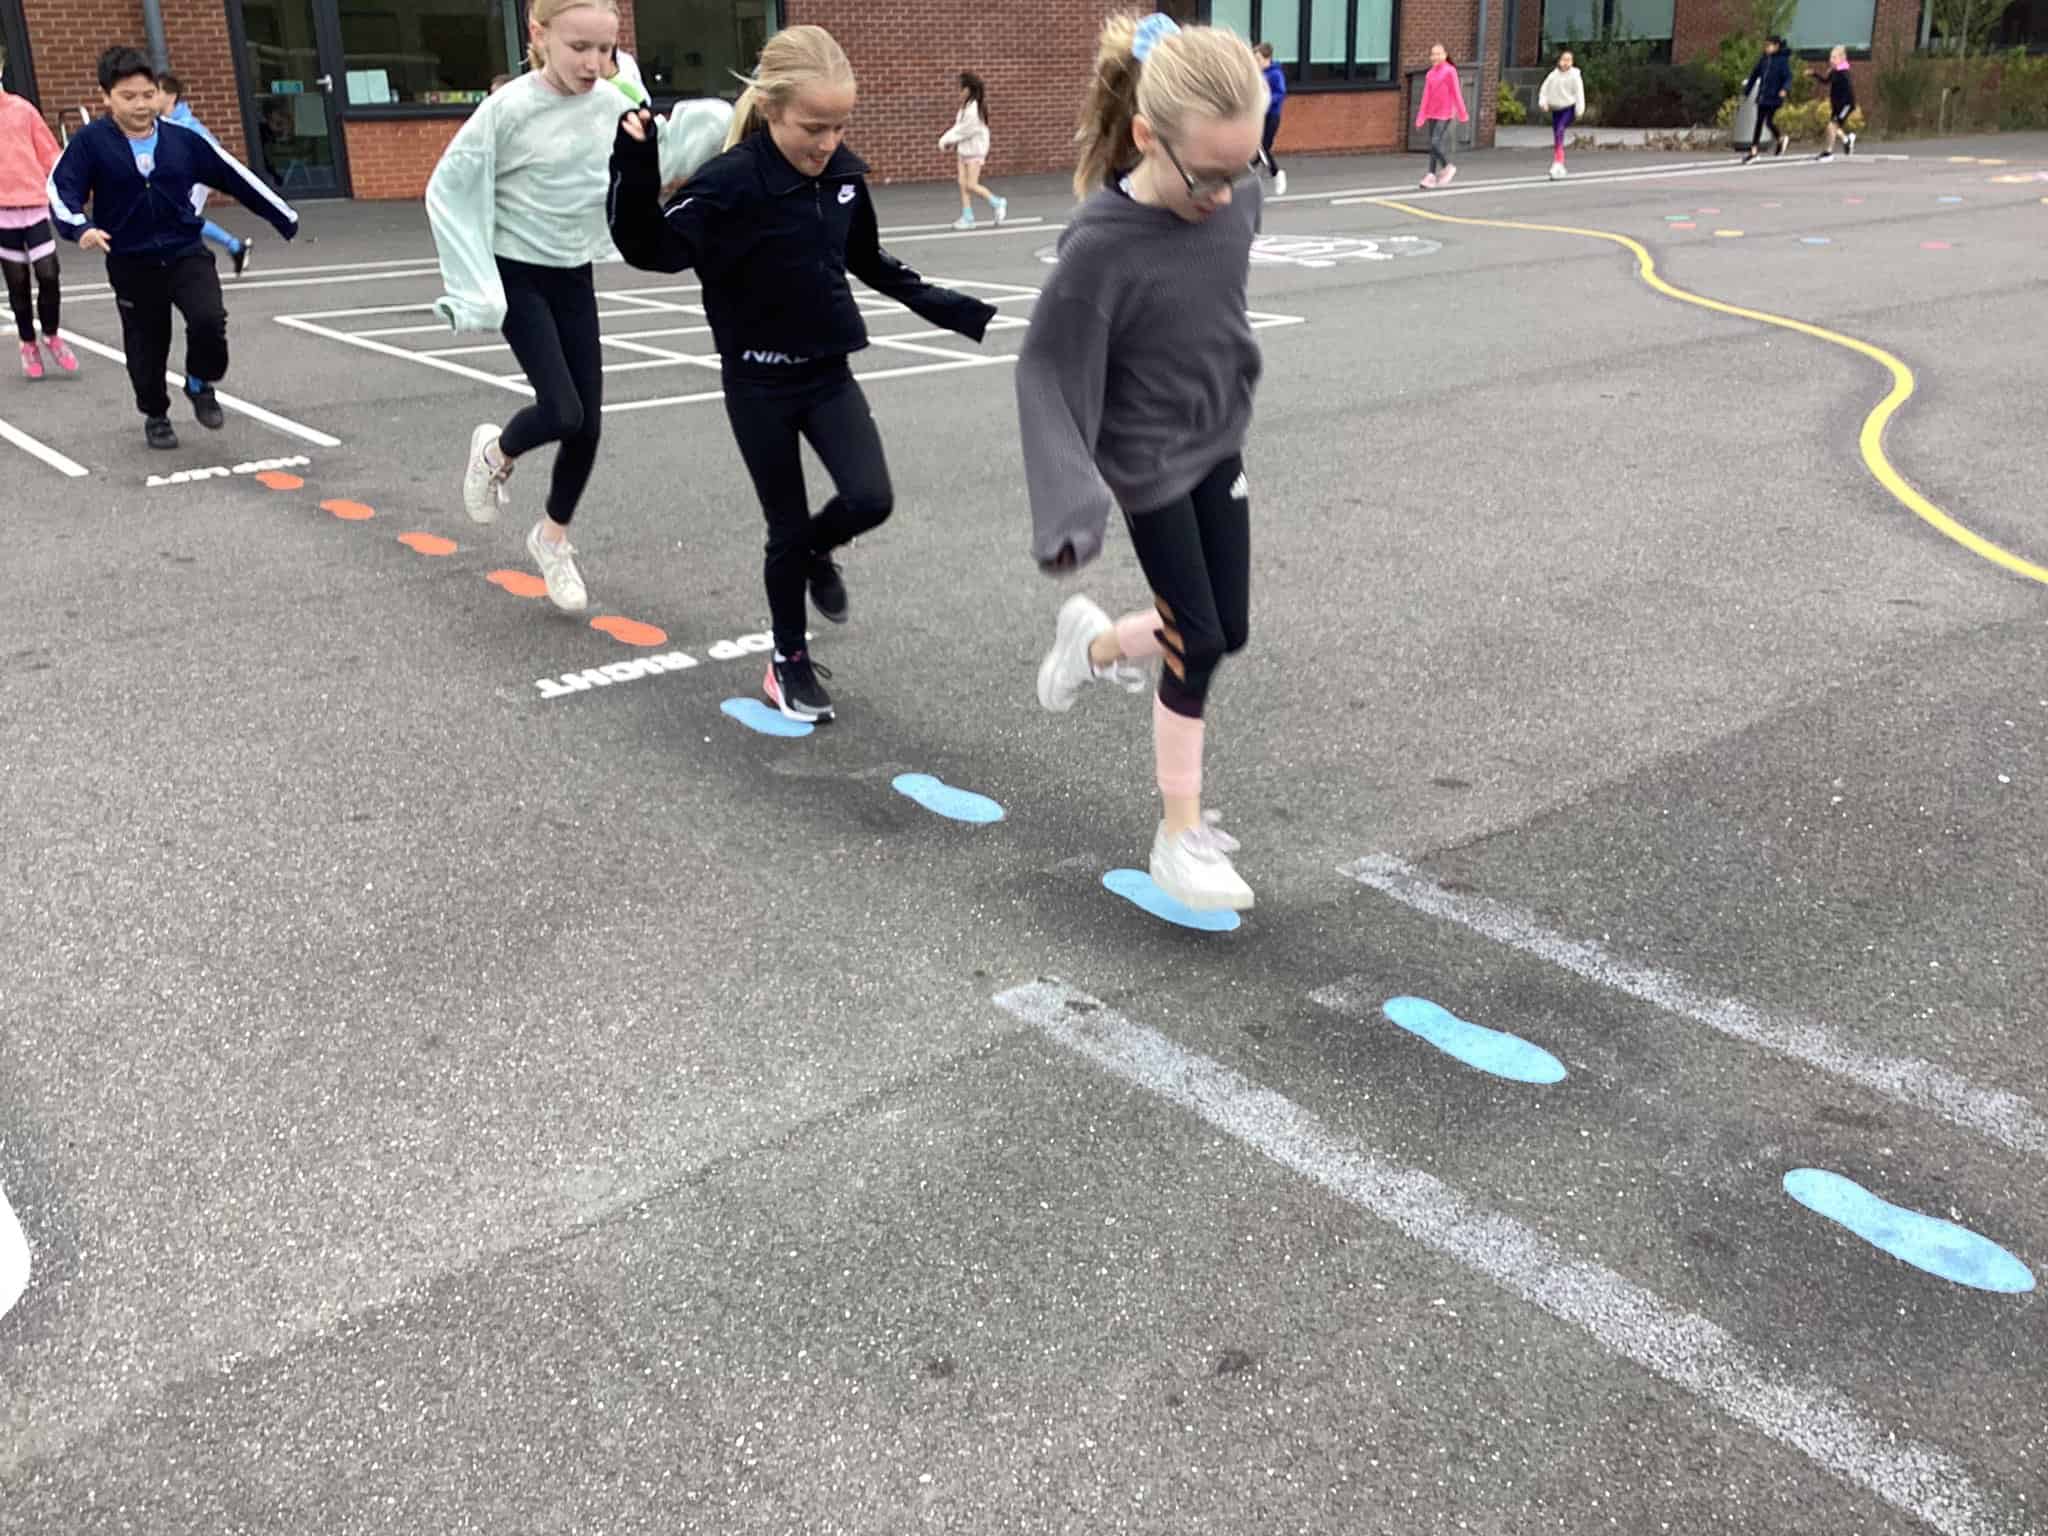 Pupils in Year 4 hop across the new playground markings during their section of the walk